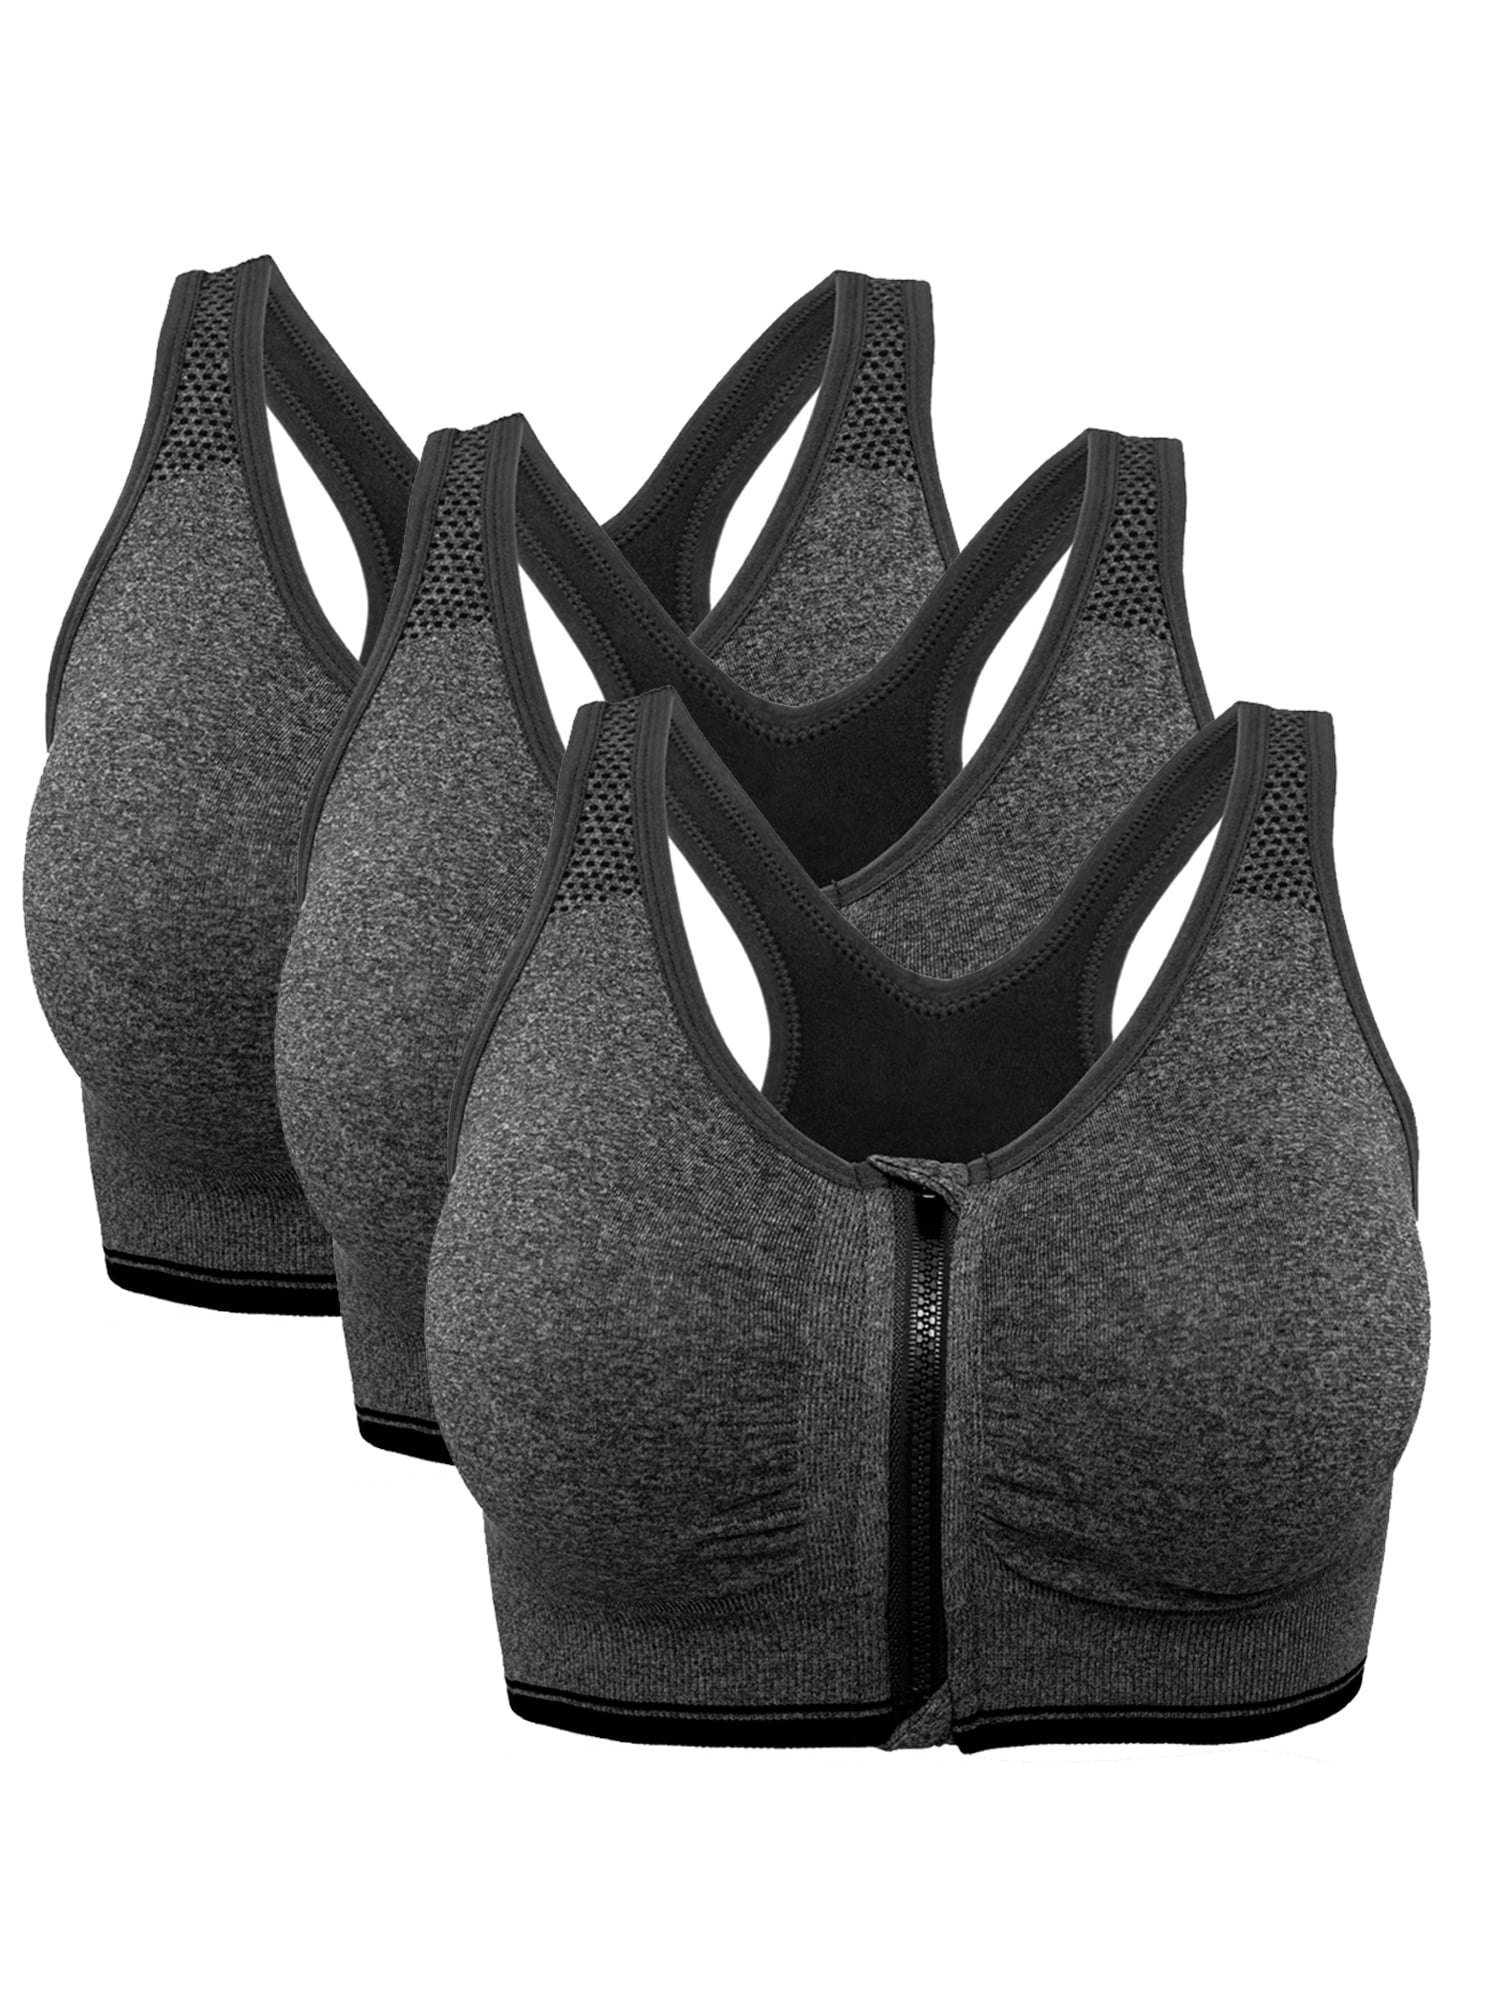 YouLoveIt Women Sports Bra, 3 pack Zipfront Padded Cups Comfort